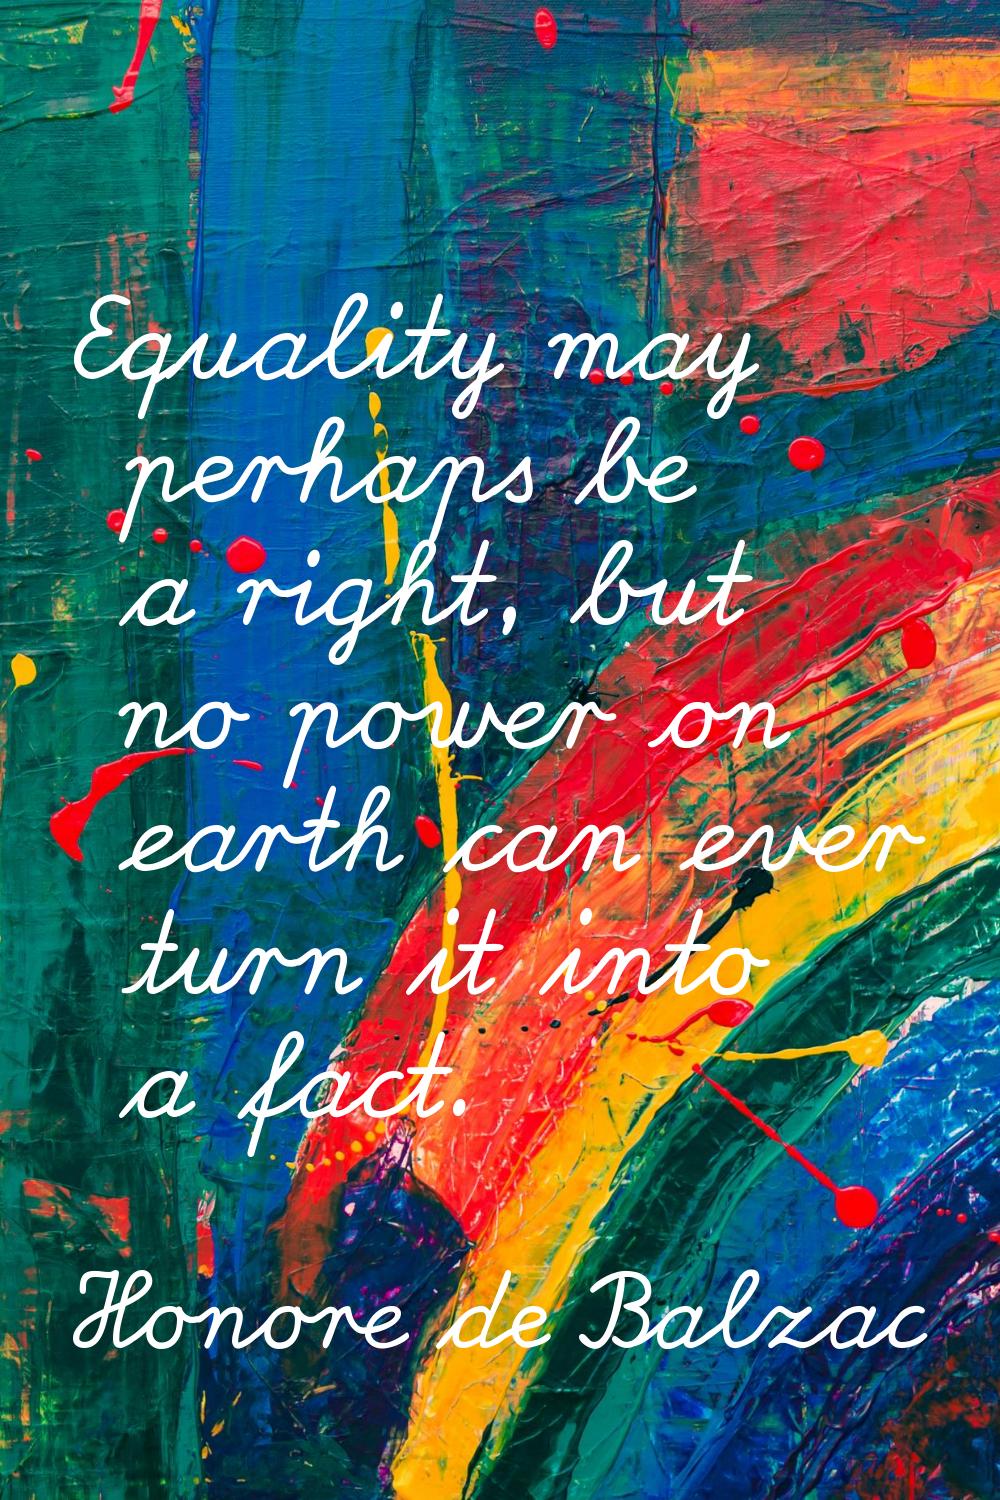 Equality may perhaps be a right, but no power on earth can ever turn it into a fact.